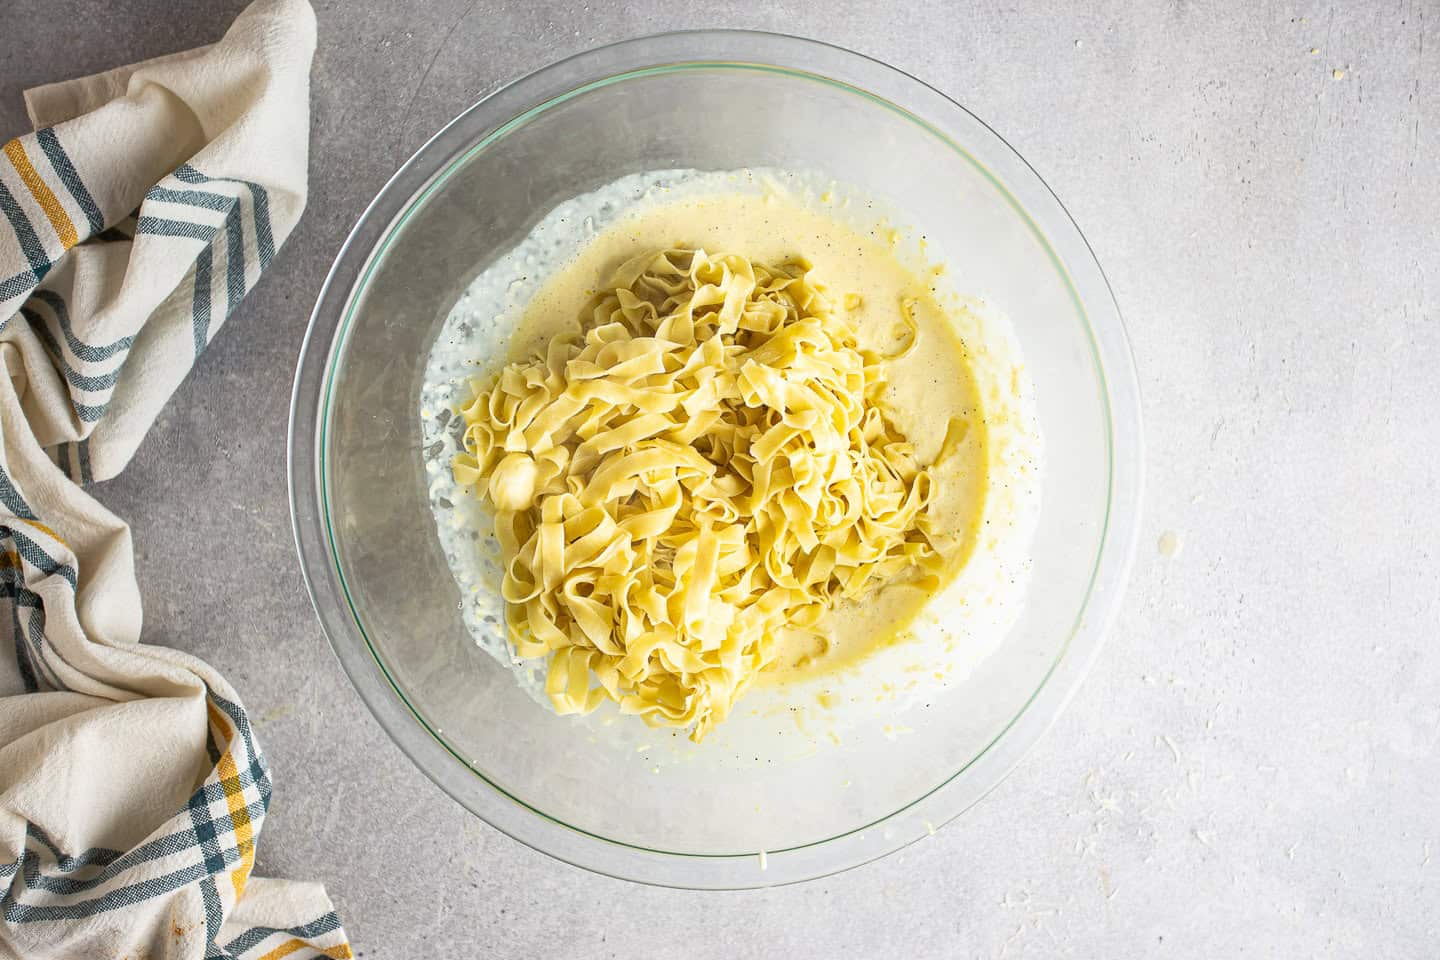 Adding cooked and buttered pasta to the creamy lemon sauce.